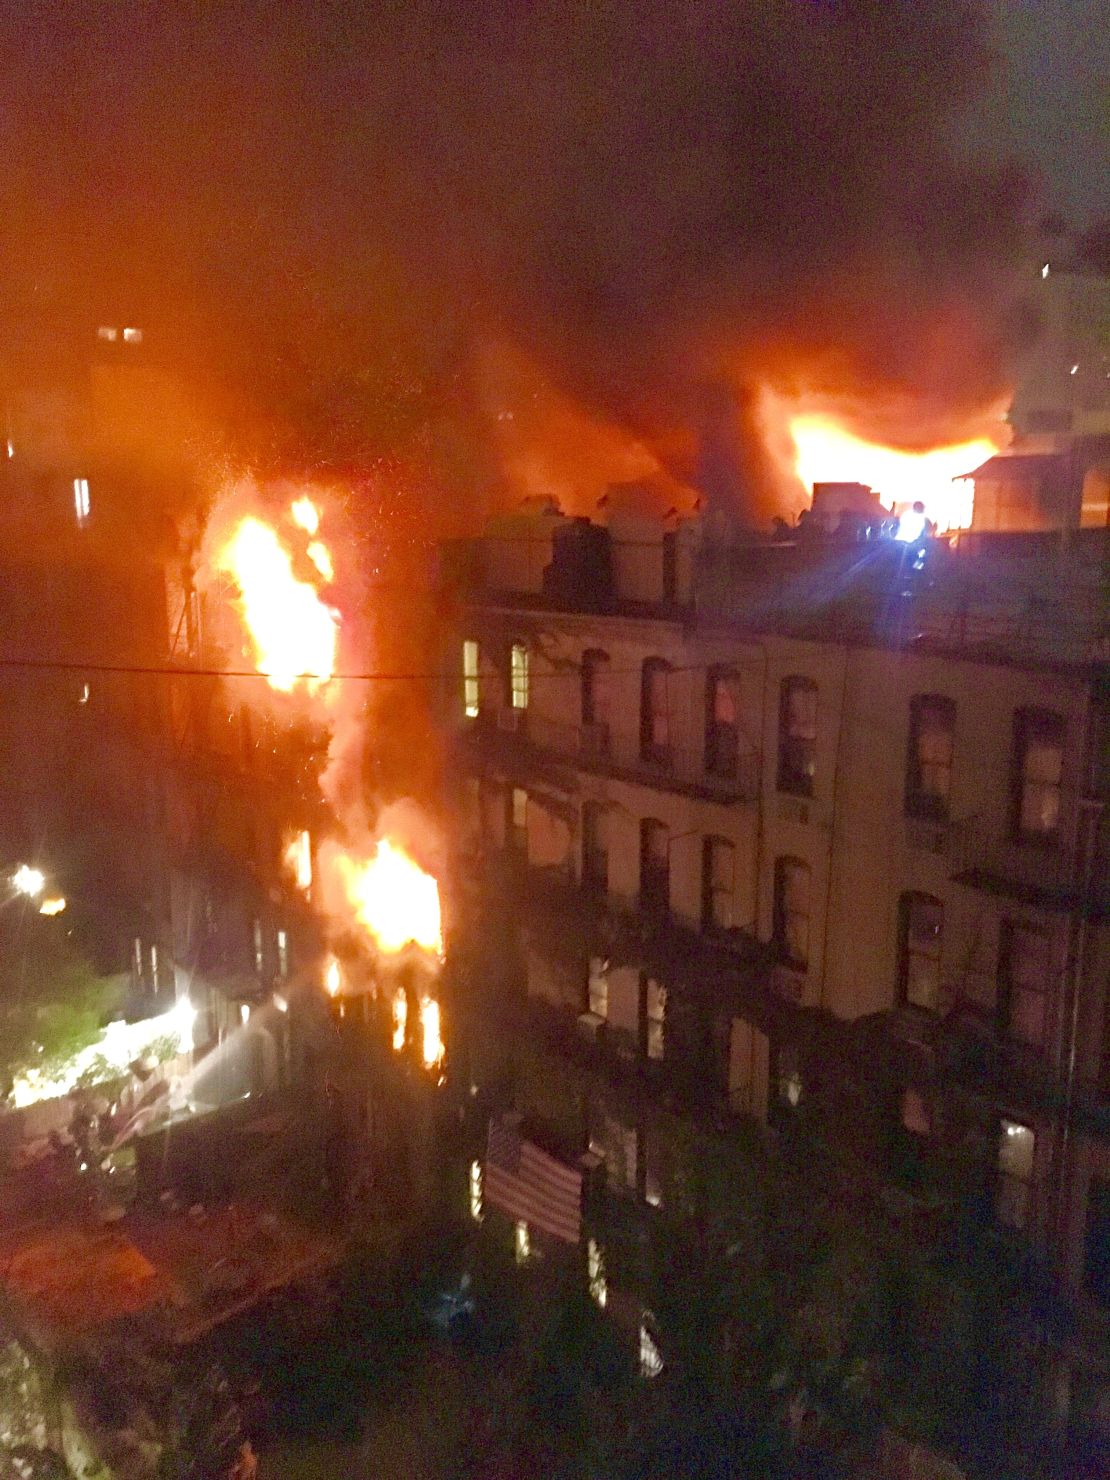 The blaze engulfed the five-story building.